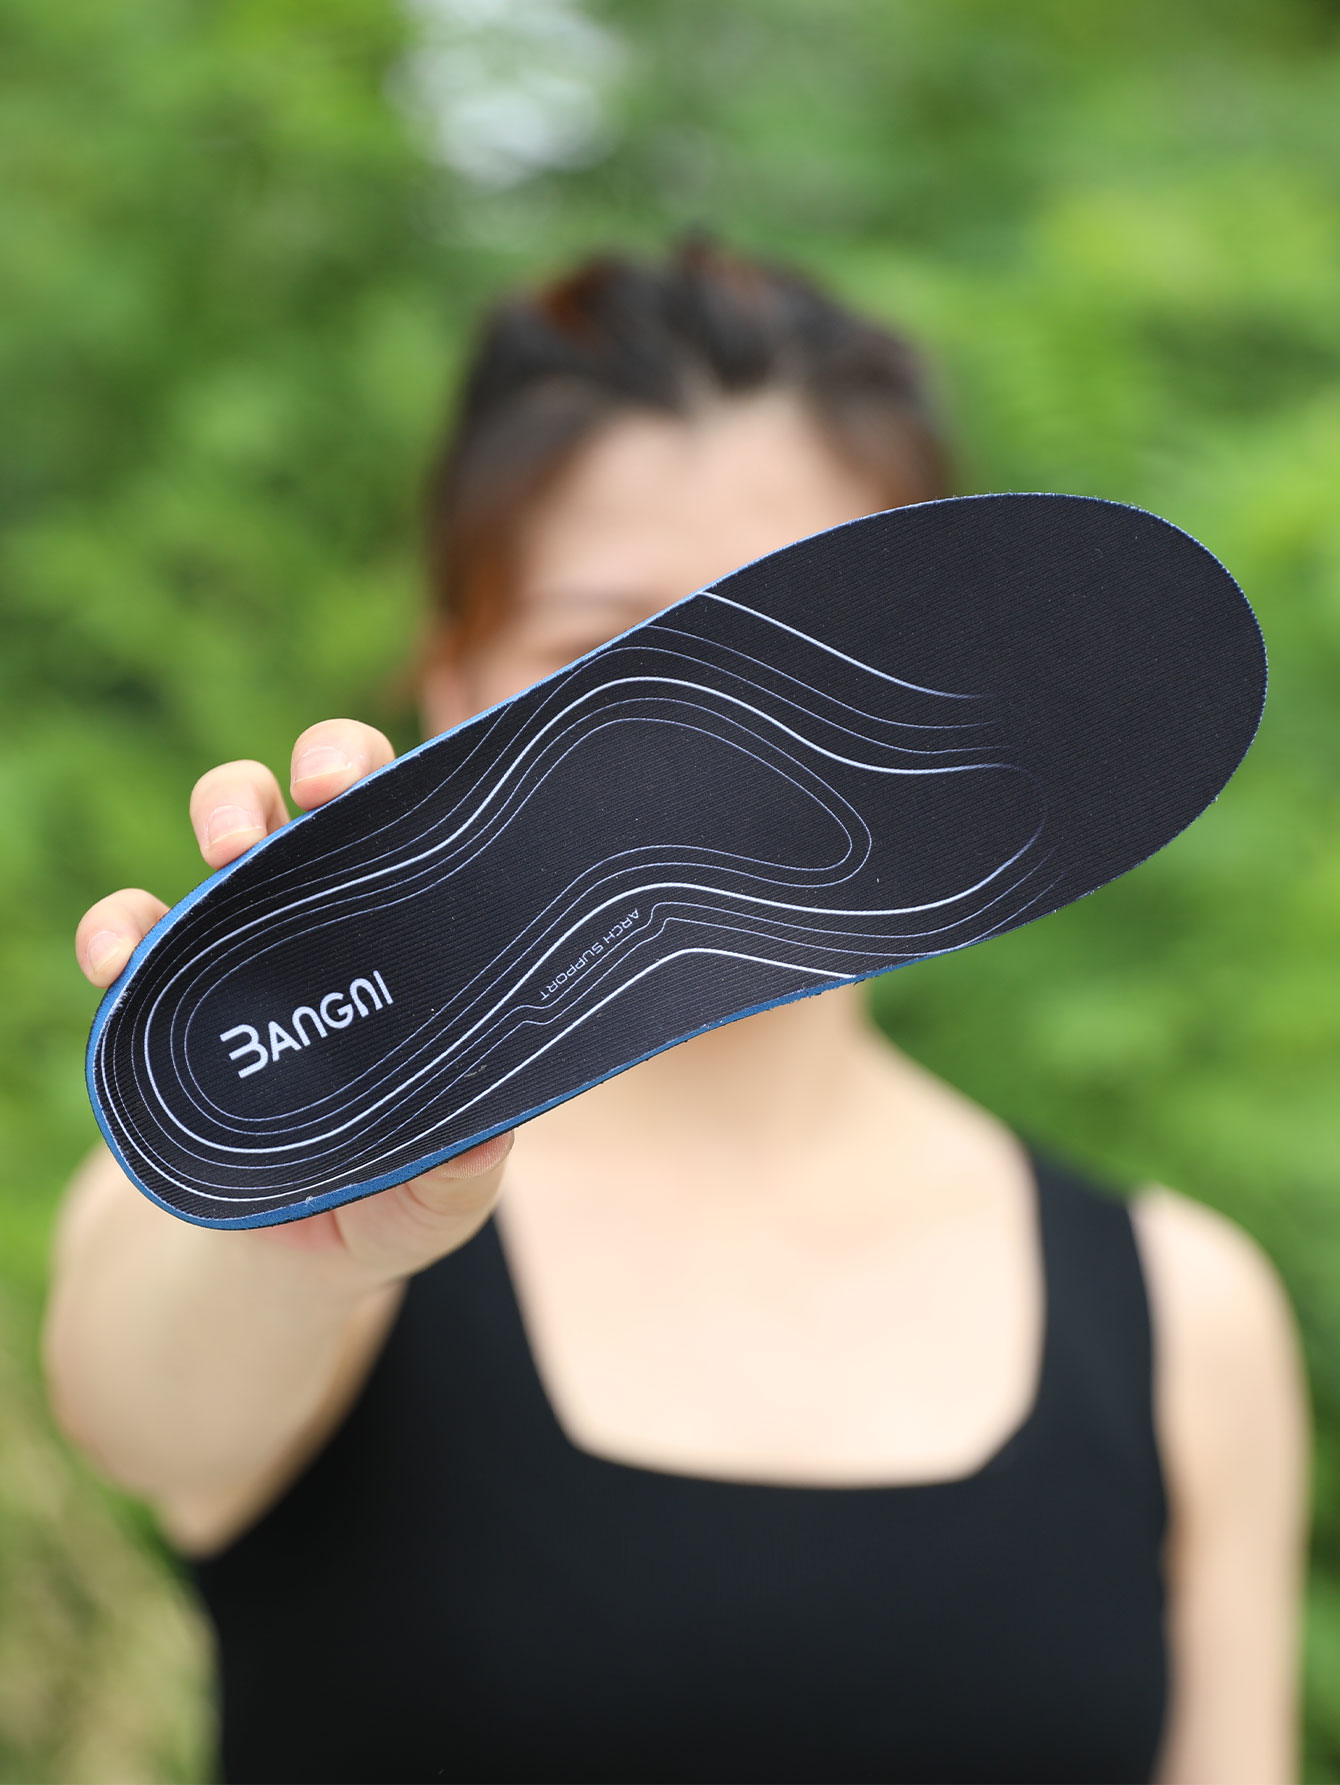 come4buy.com-Arch/Heel Pain Relief Orthotic Insoles Foot Valgus Flat Feet Shoes